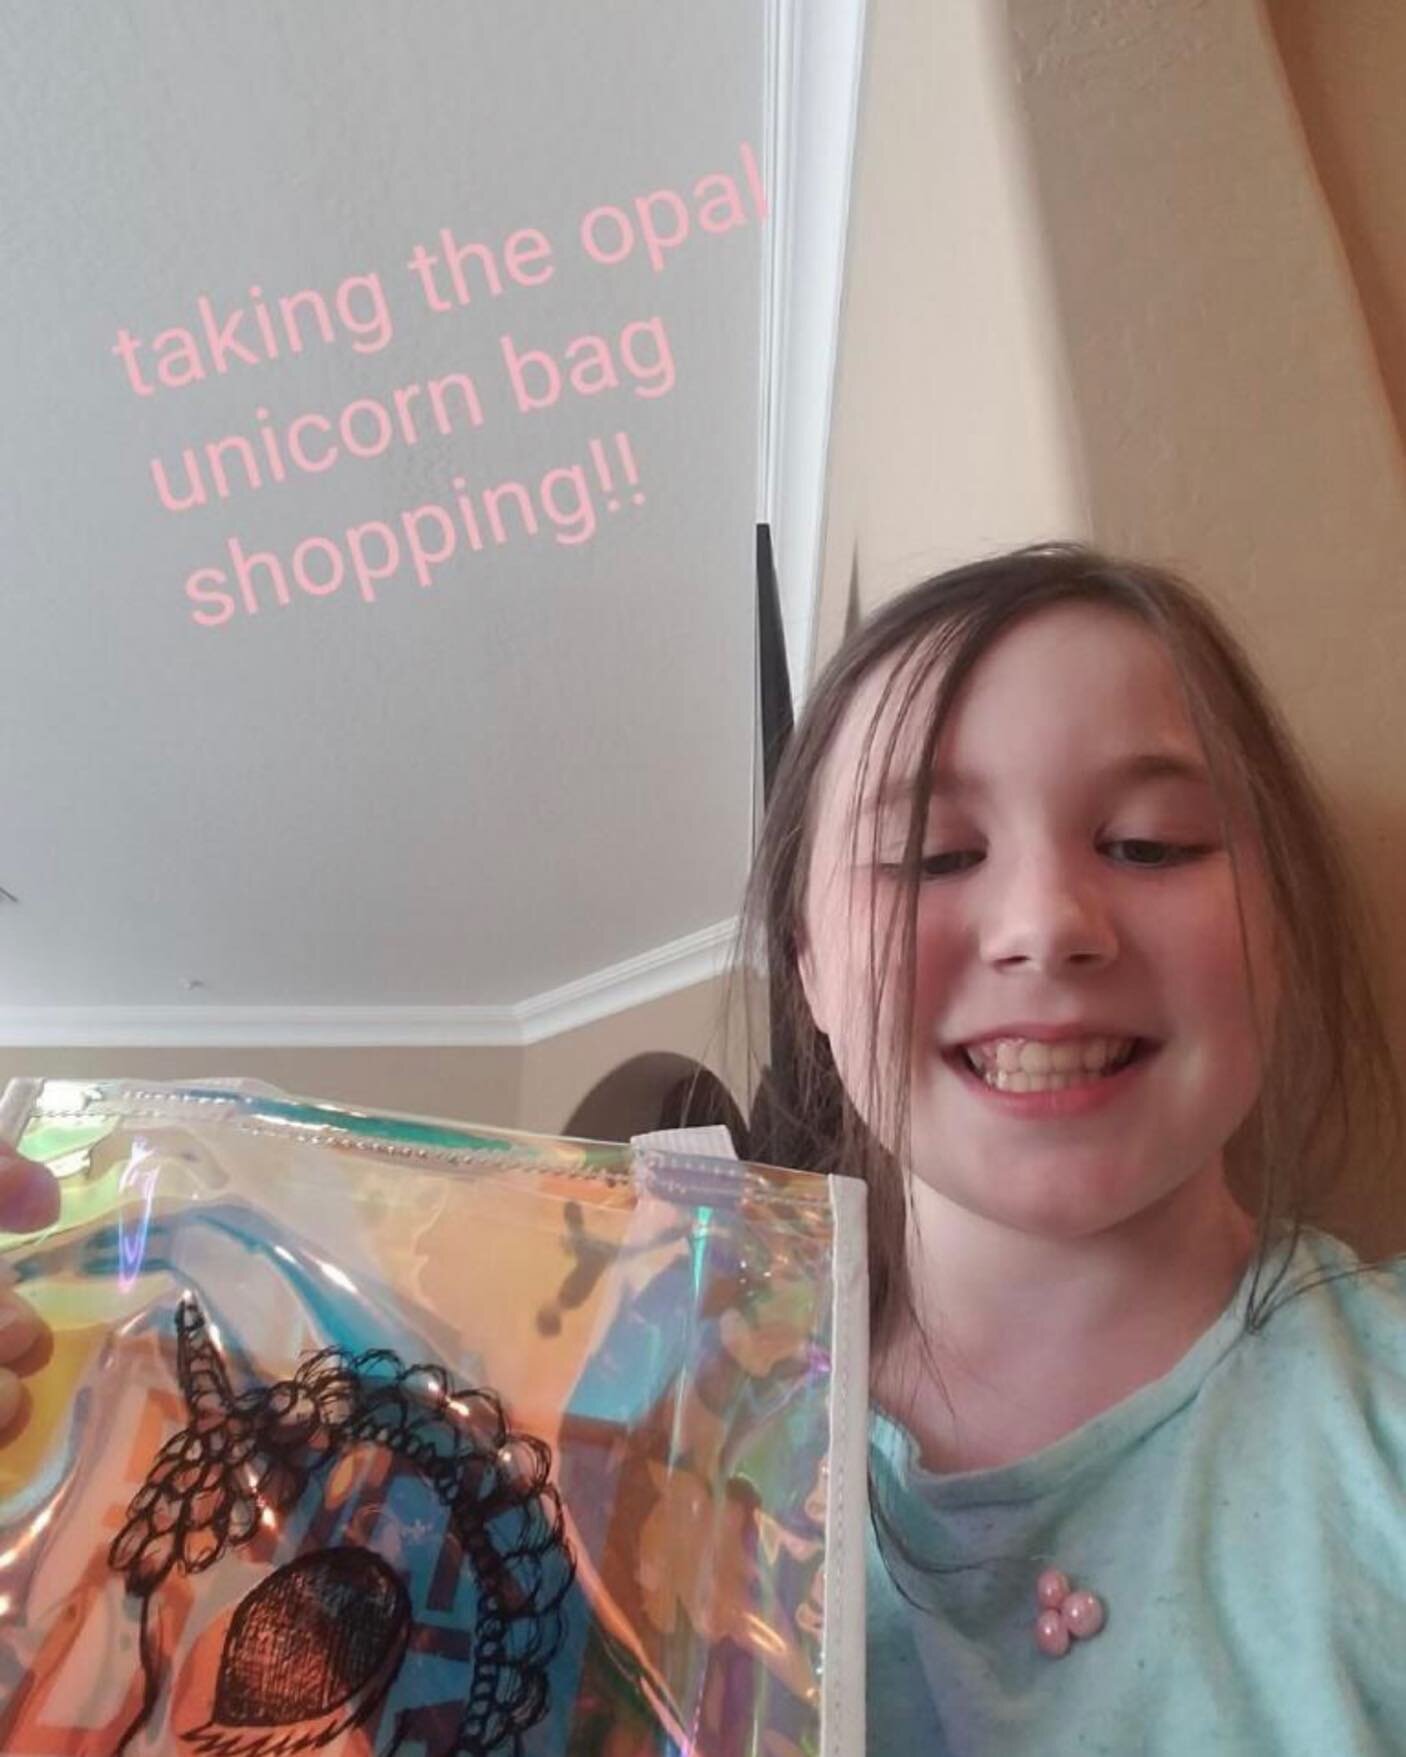 The cutest unicorna ever having a blast with #opalunicorntotes because when ur a unicorn...why not ?
Thank you to the lovely artist and poet @k_mc 🦄⛅️🌈👏💕